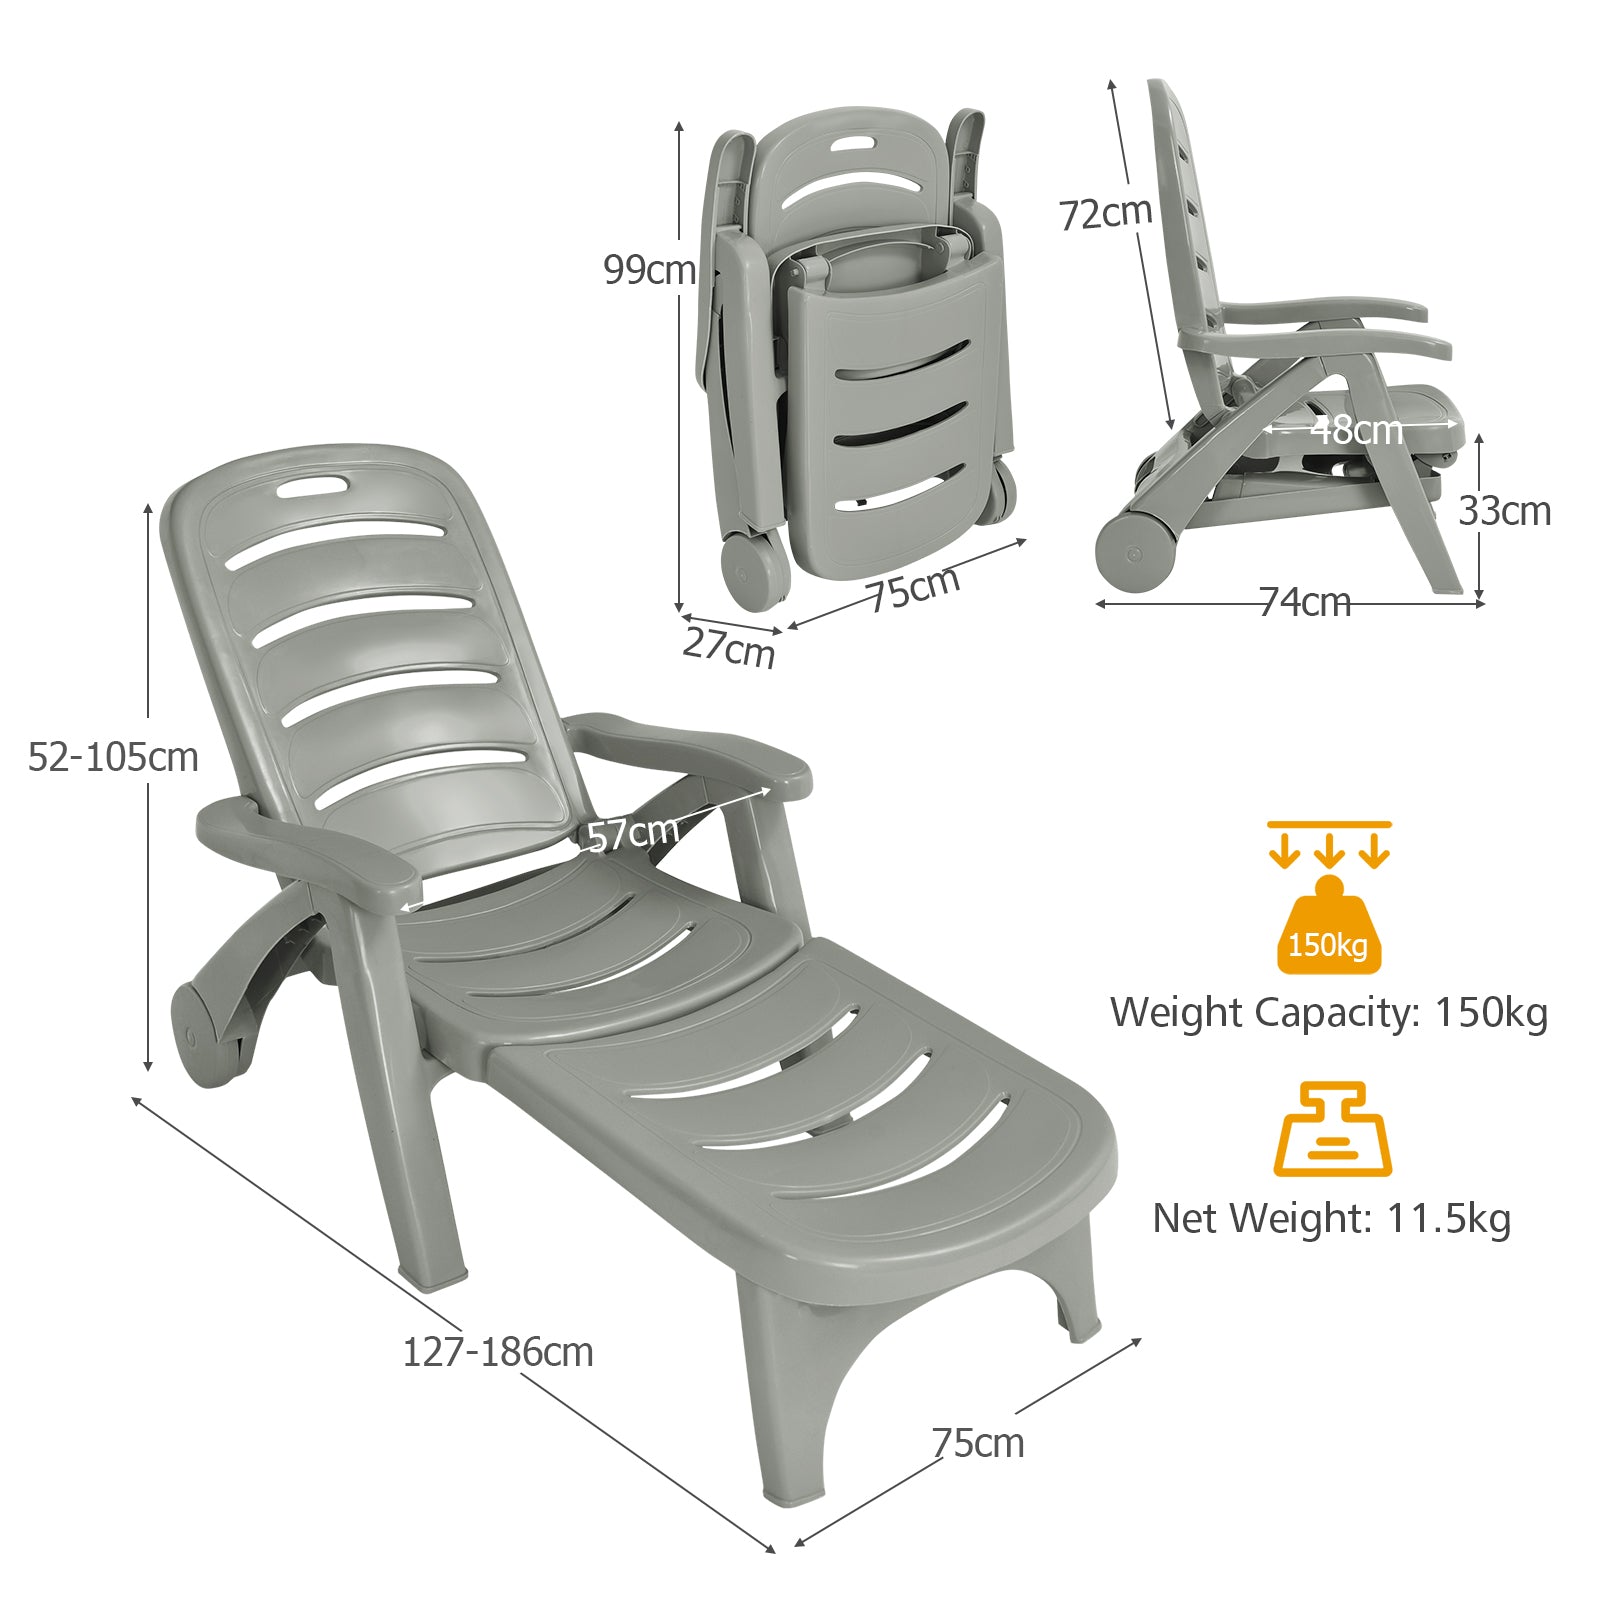 Adjustable Chaise Lounge Chair with Built-In Wheels-Grey